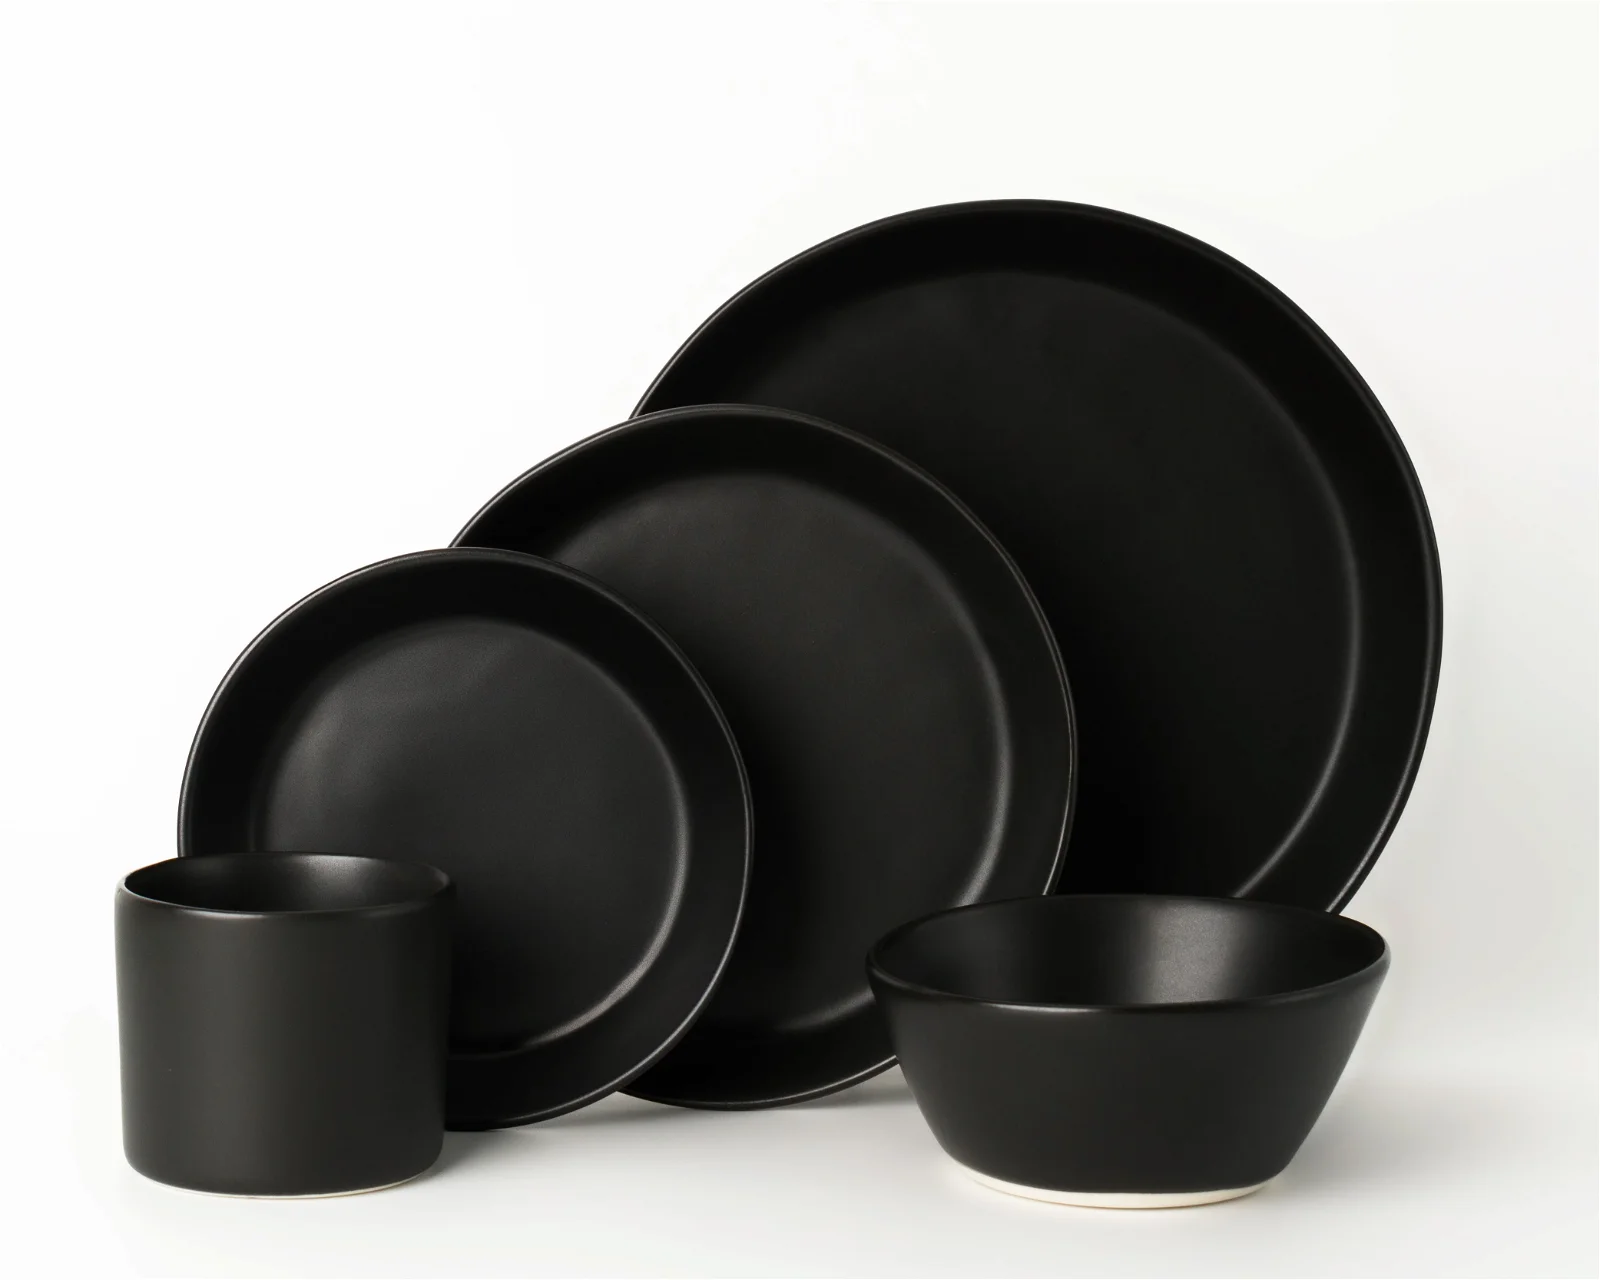 Image of 5 Piece Skali Coupe Dinner Setting